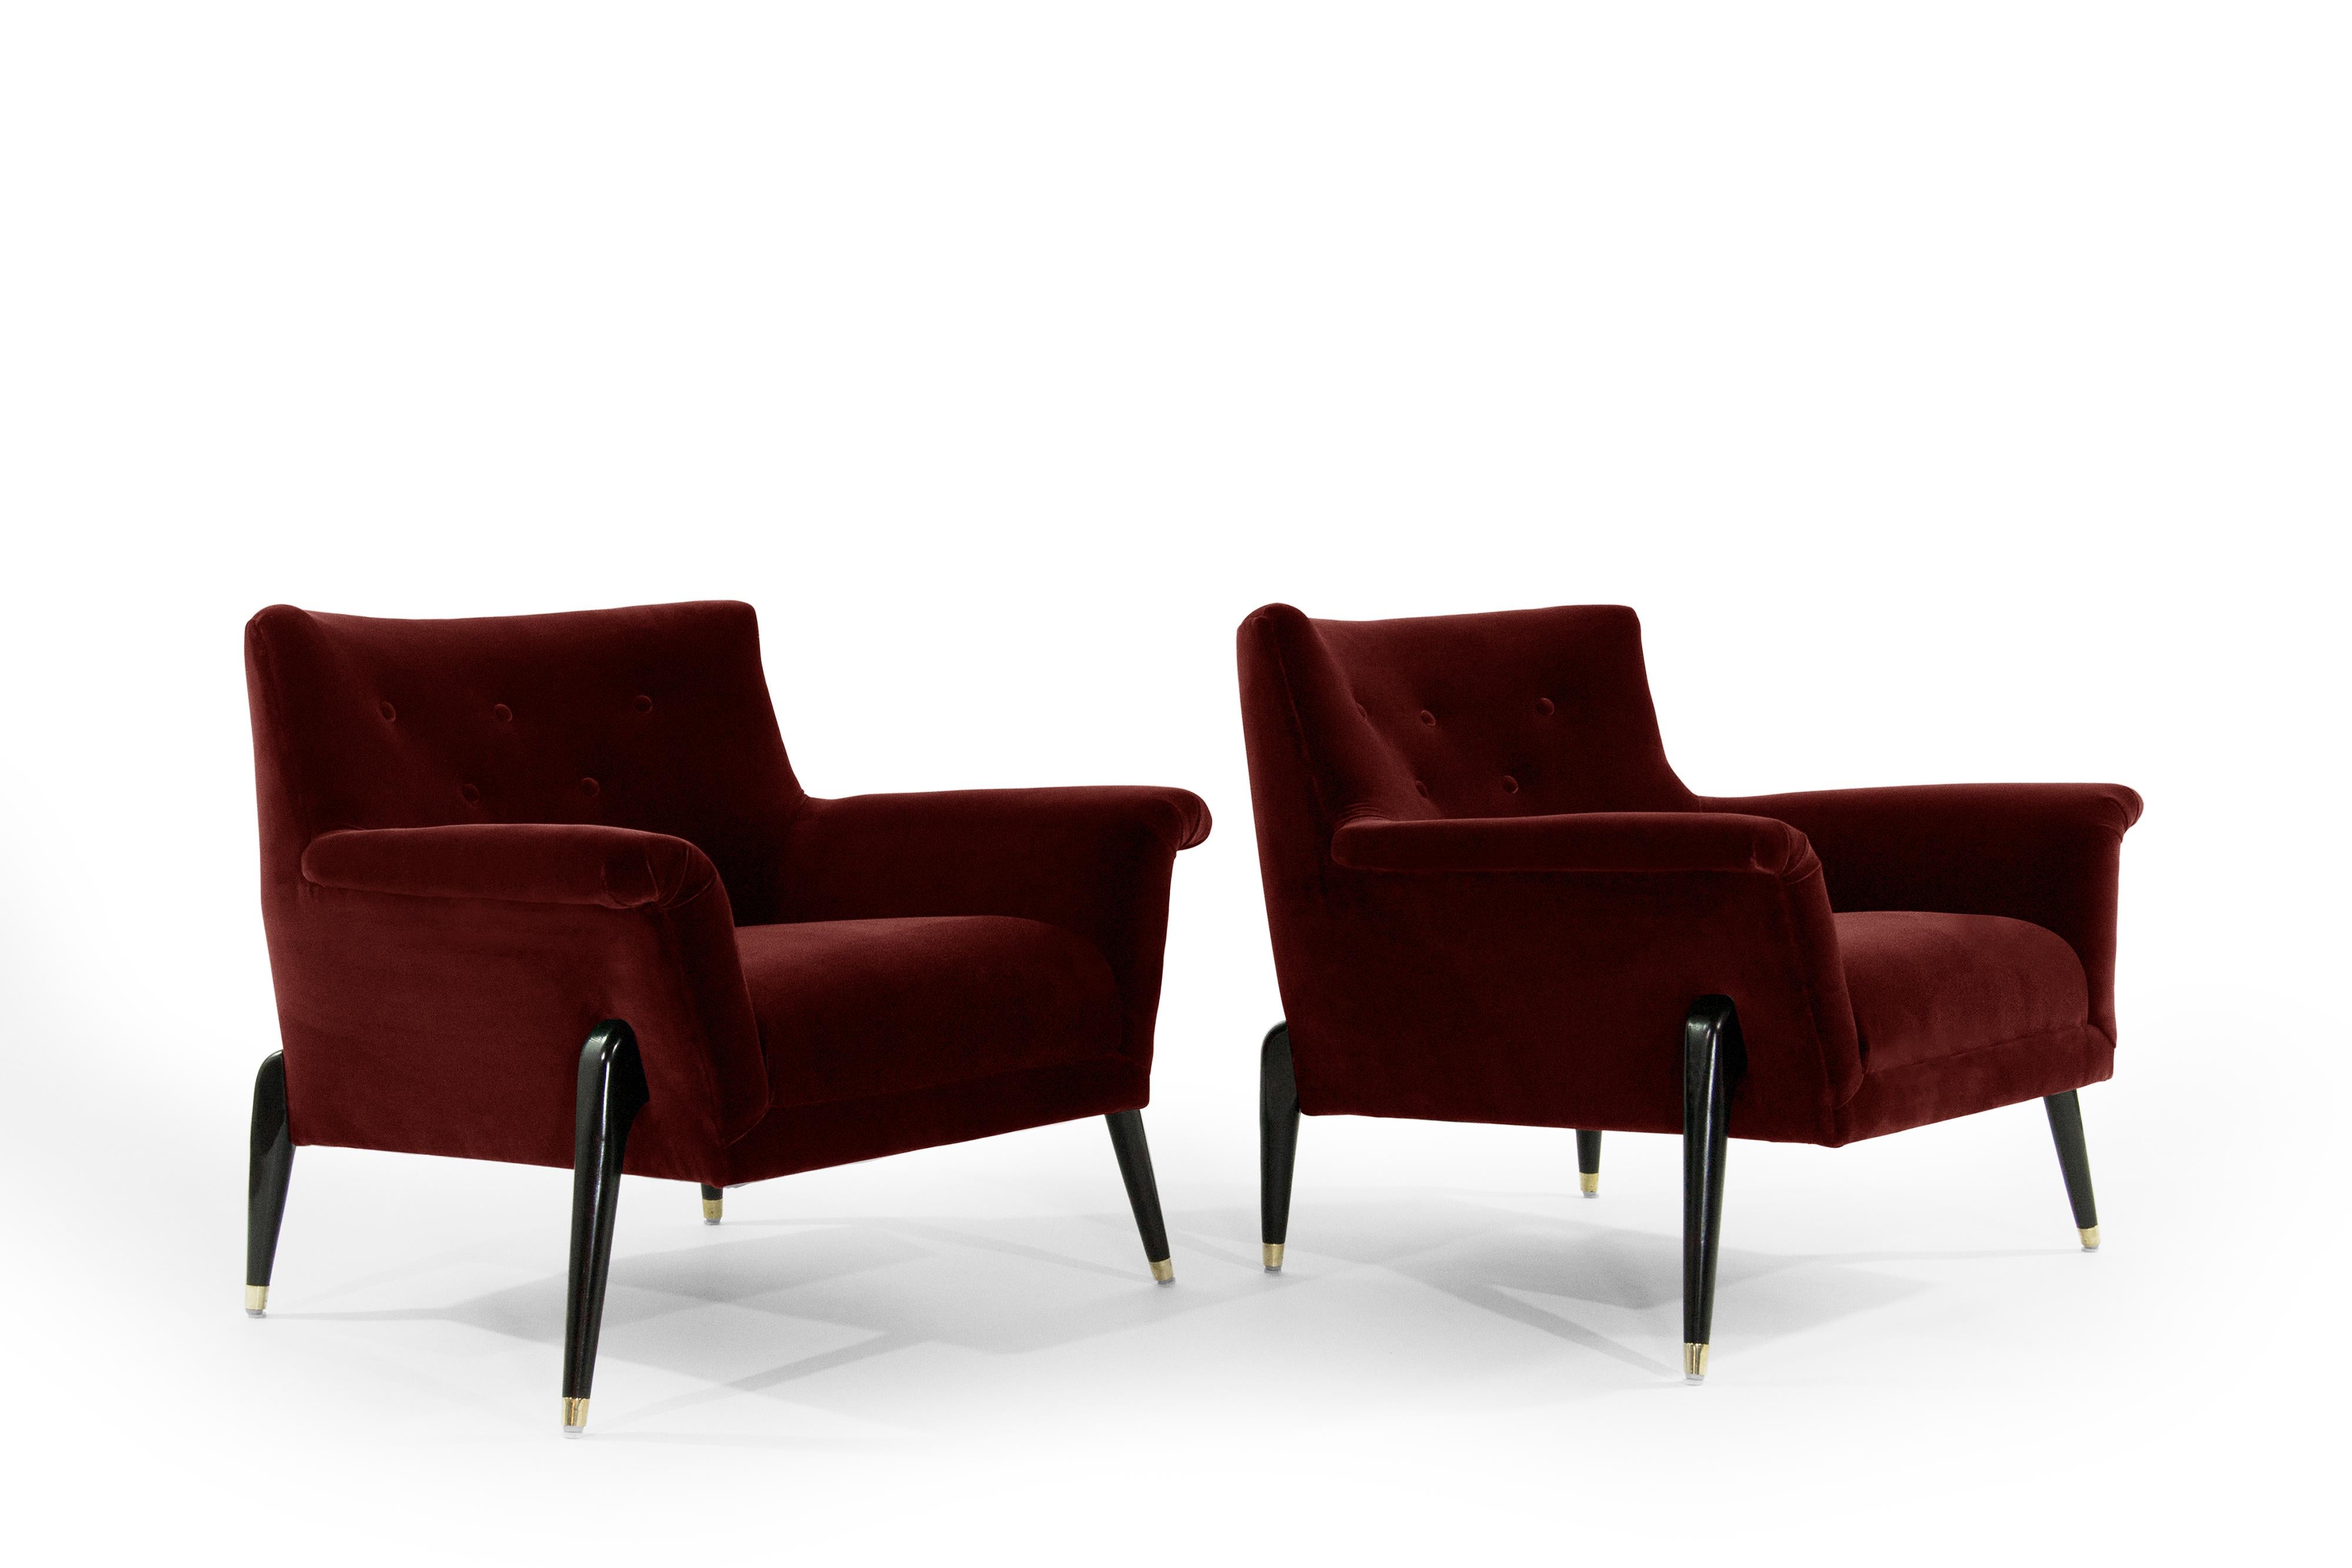 Pair of important Italian spider leg lounge chairs in the style of Ico Parisi or Jean Royére, all of the exposed wooden legs have been ebonized, brass sabots newly polished. Re-upholstered in a high-quality burgundy mohair.



  